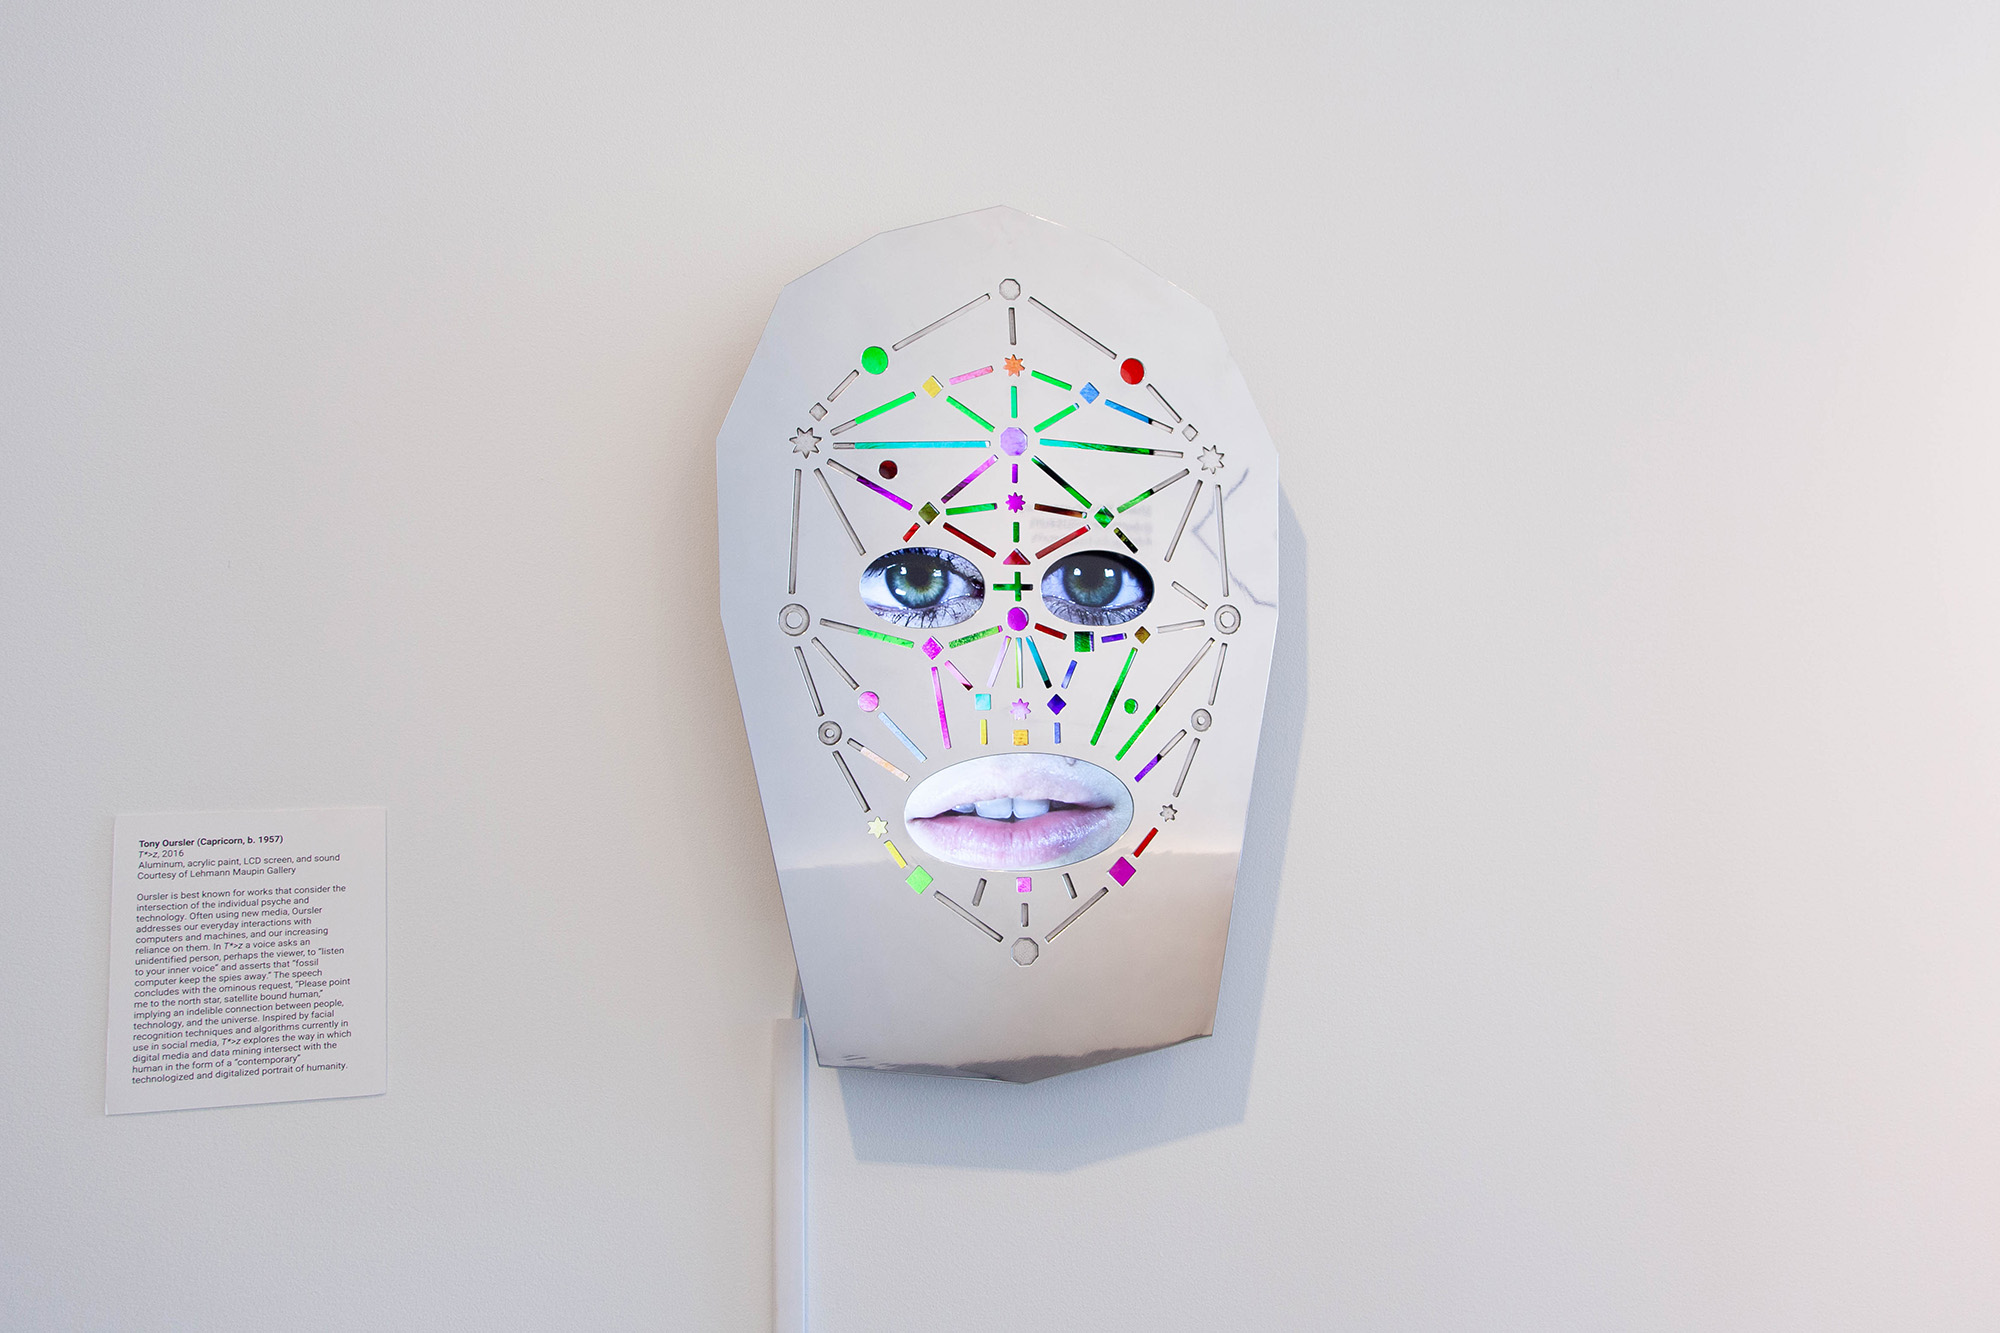 Tony Oursler, T*>z, 2016. Courtesy of Lehmann Maupin Gallery. Installation view in New Age, New Age: Strategies for Survival at DePaul Art Museum, 2019. Photo: DePaul Art Museum